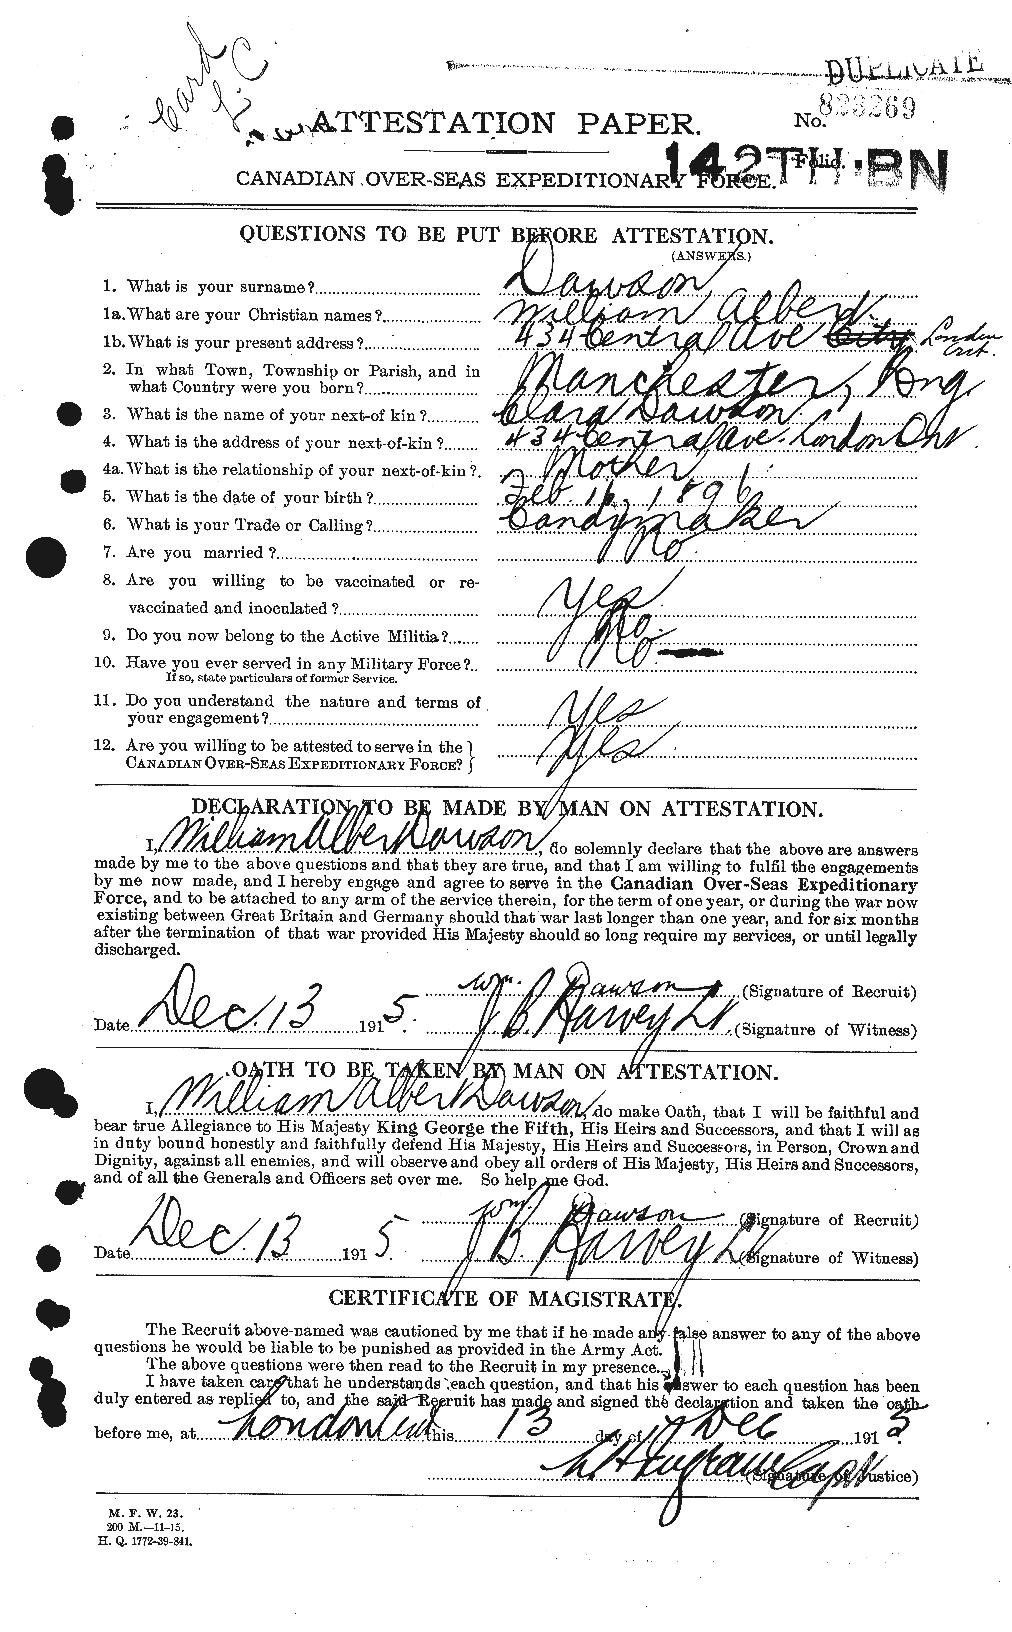 Personnel Records of the First World War - CEF 282883a